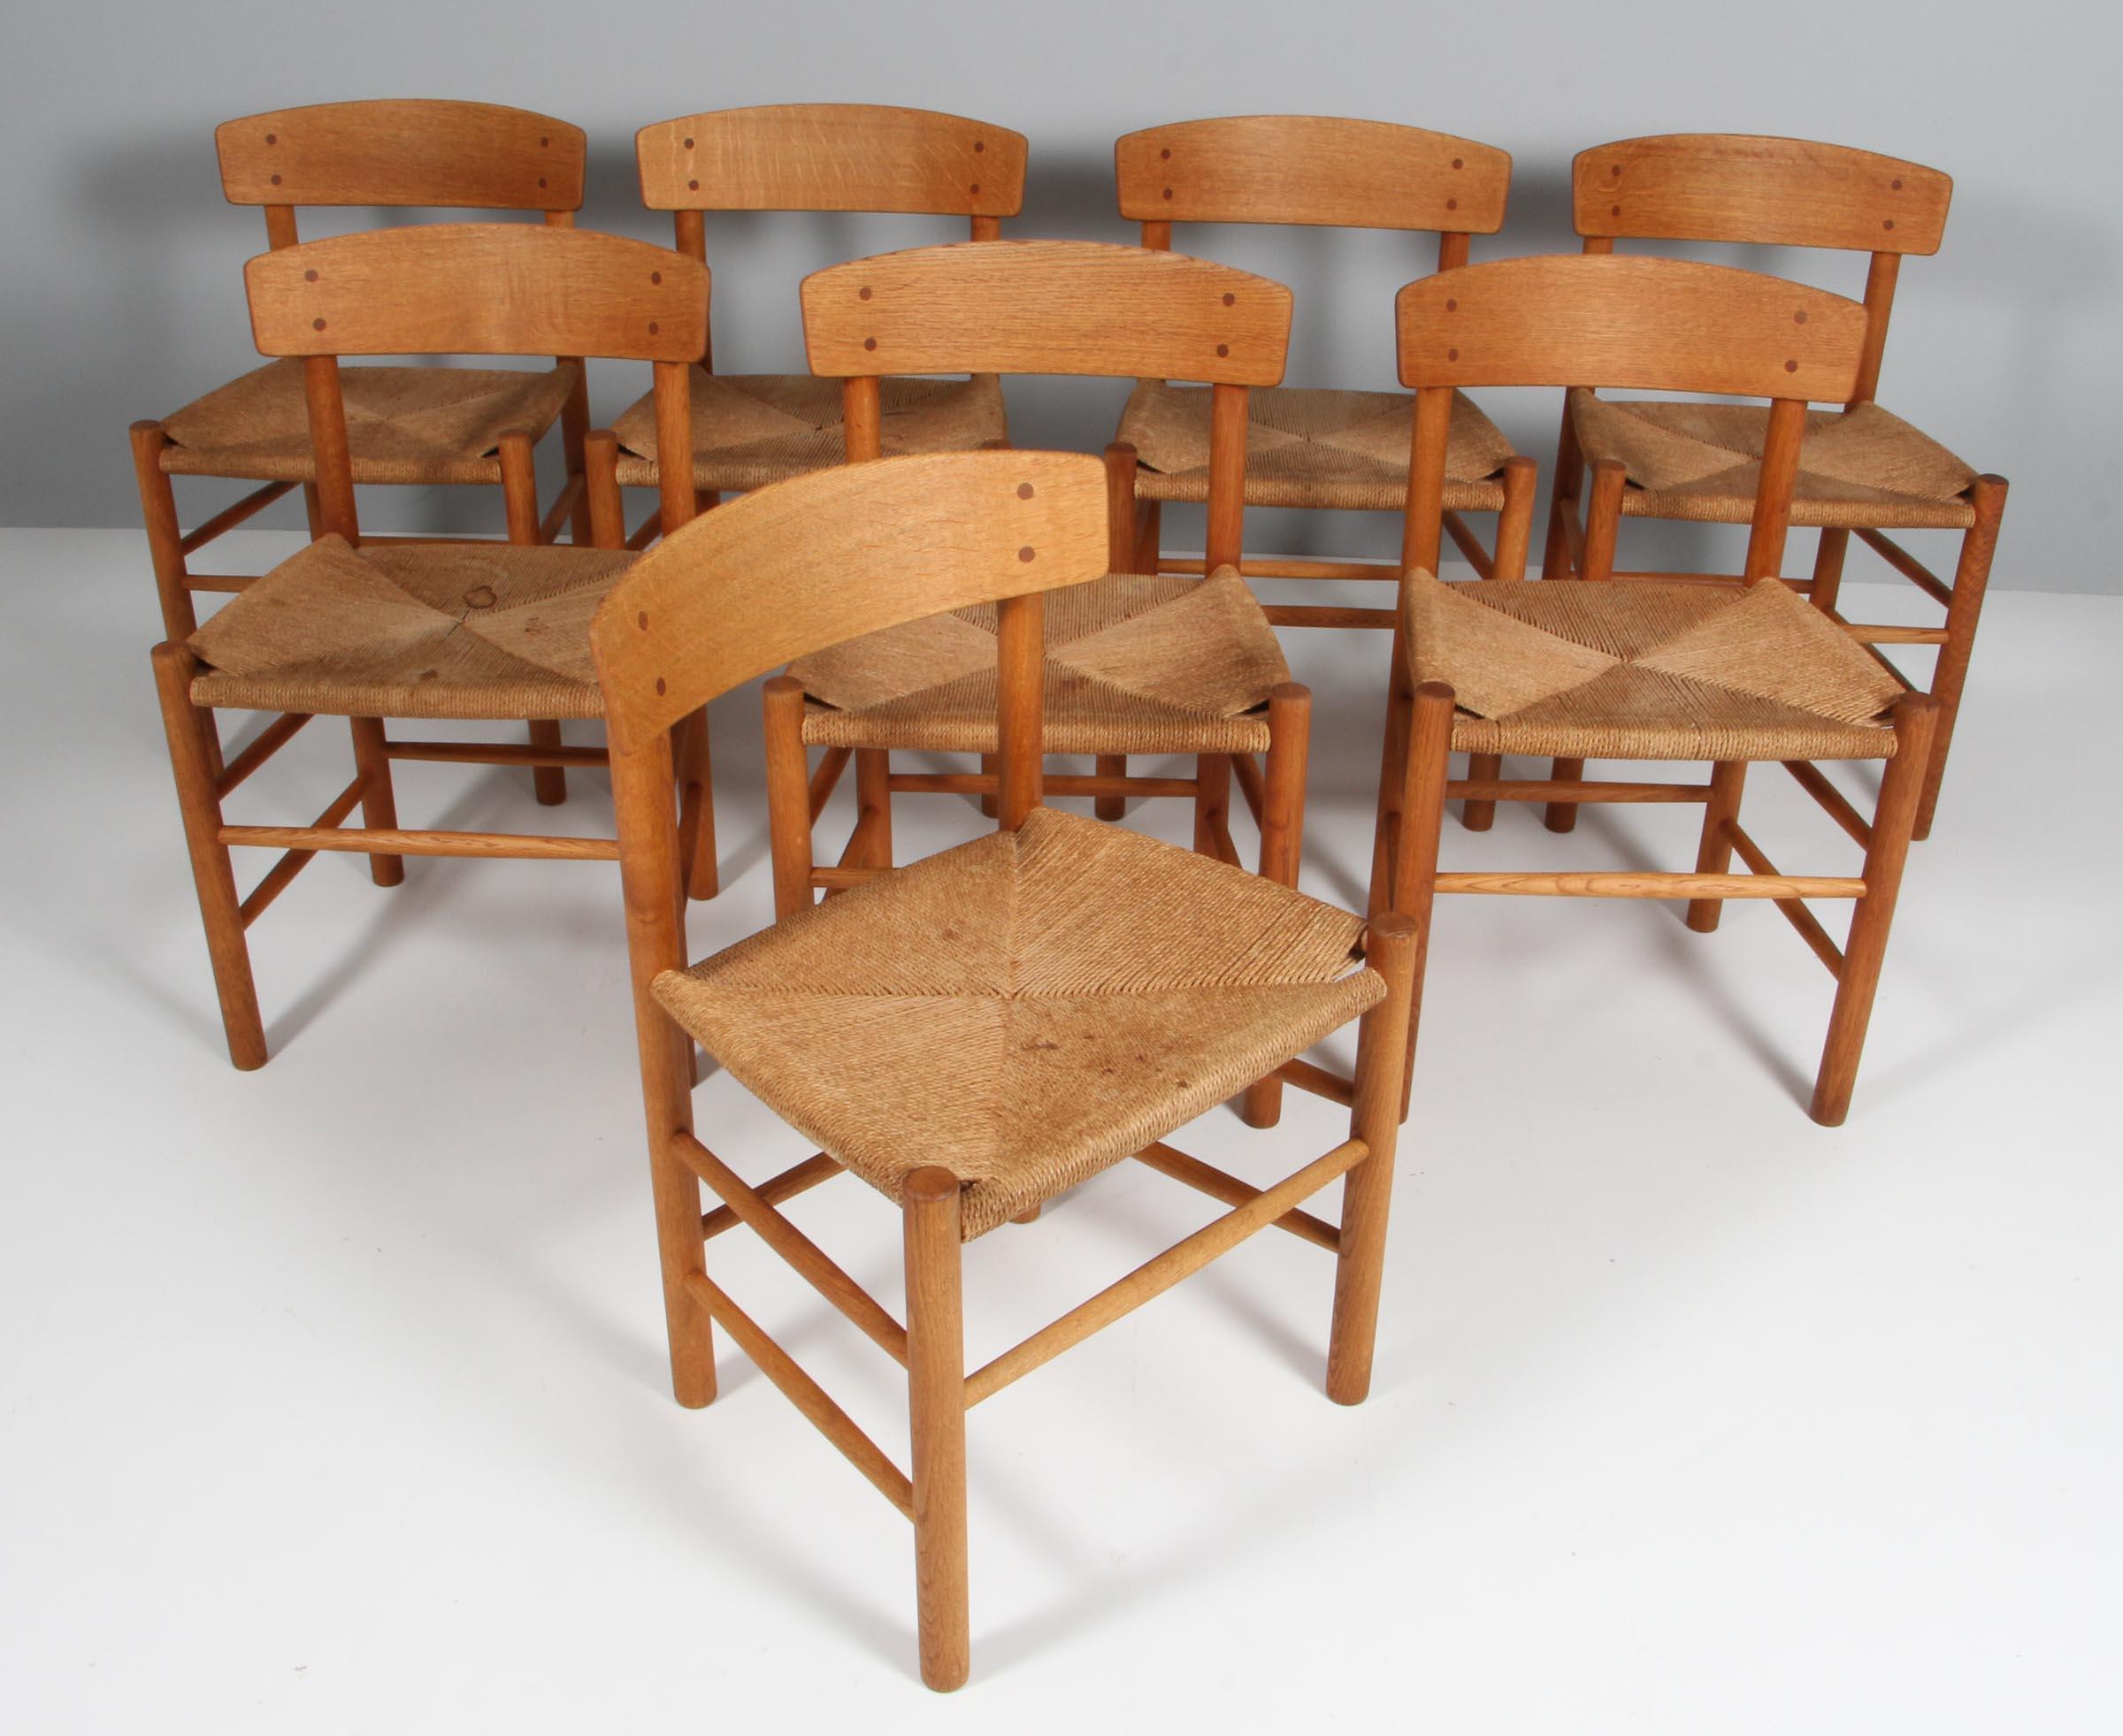 Børge Mogensen or FDB Møbler, set of eight of dining chairs model 'J39', Oak , handwoven Papercord, Denmark, design 1947.

The design of Børge Mogensen's J39 design is in many ways aesthetically pleasing. Not only provides the handwoven seagrass a